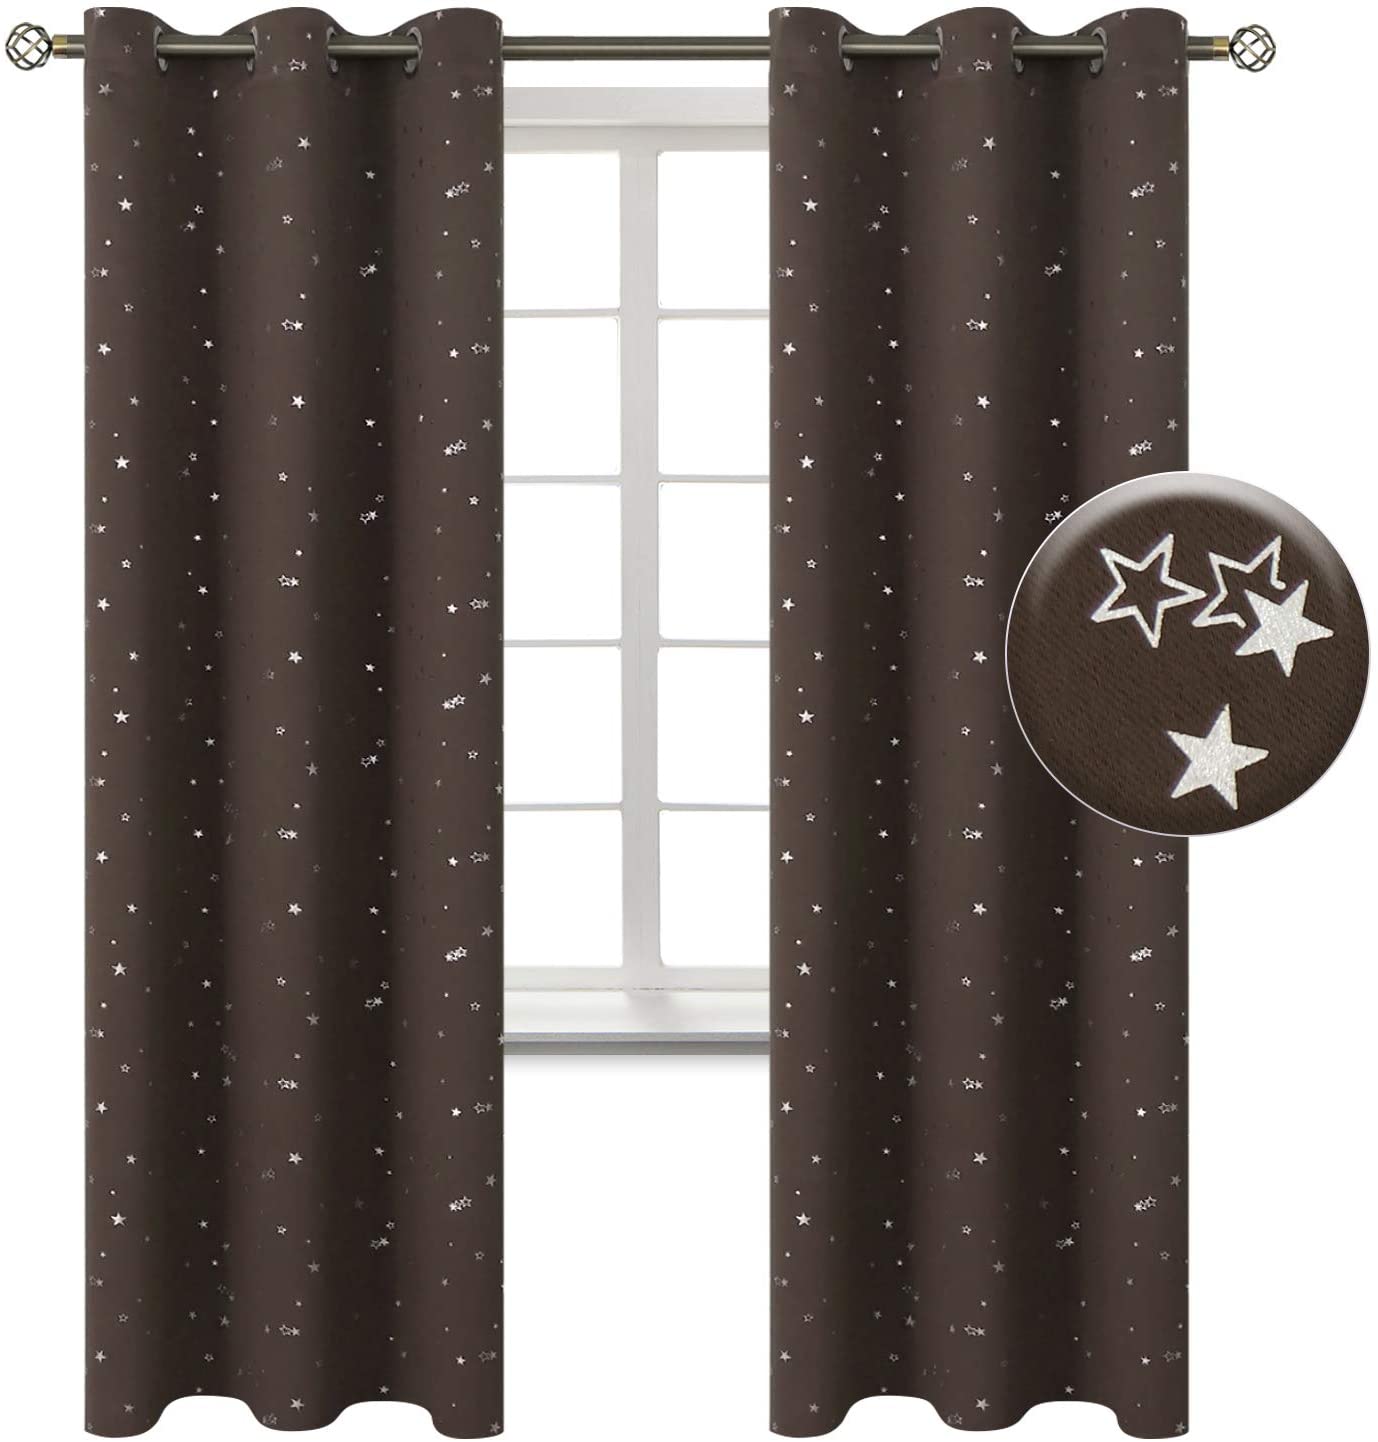 Grommet Thermal Insulated Silver Sta BGment Kids Blackout Curtains for Bedroom